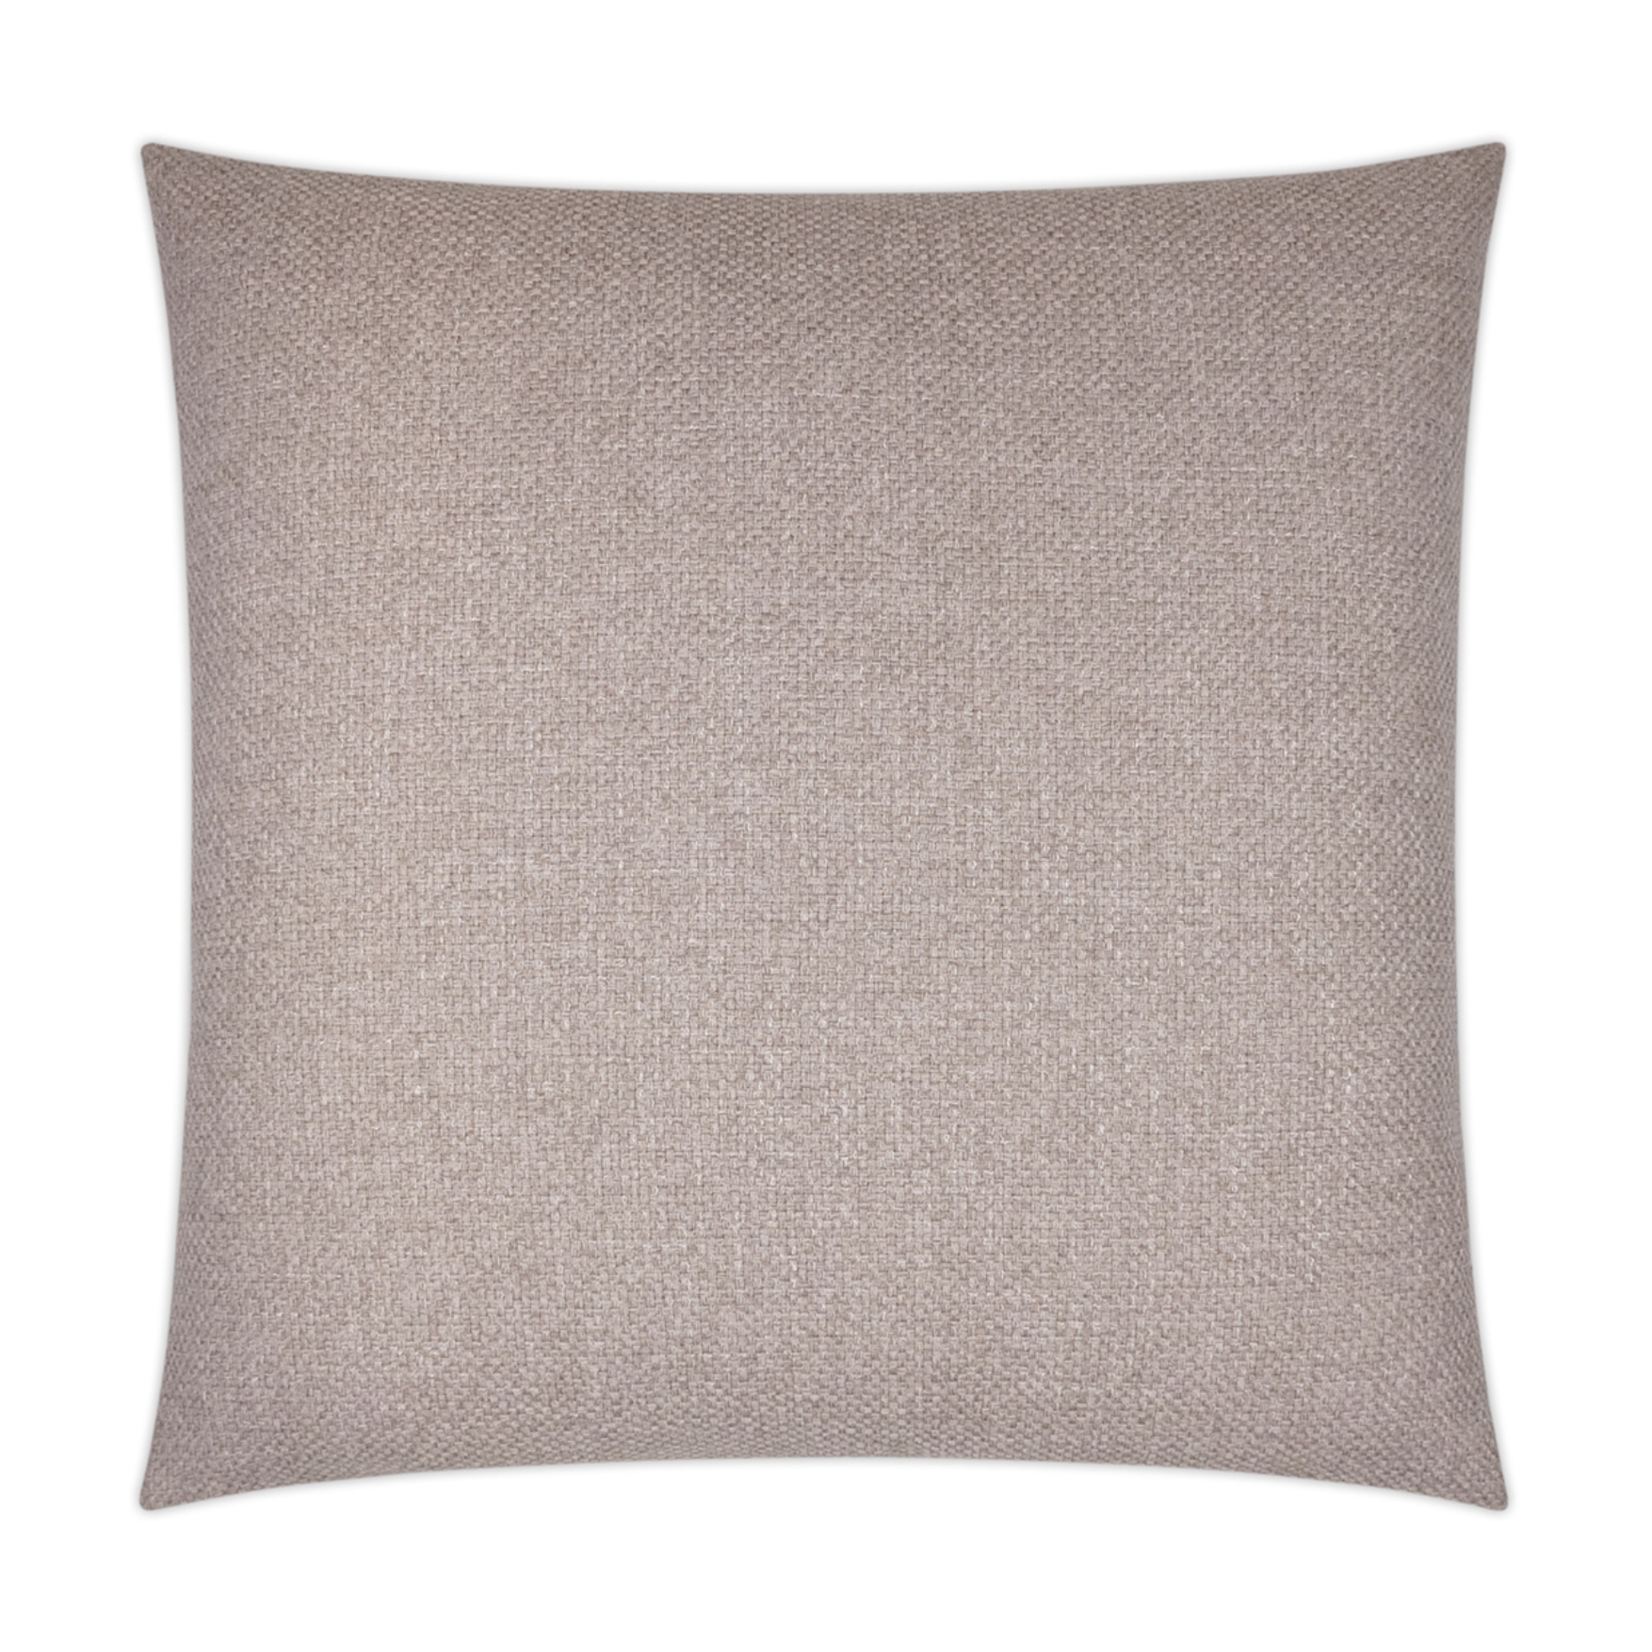 Outside The Box 24x24 Prelude Square Feather Down Pillow In Blush